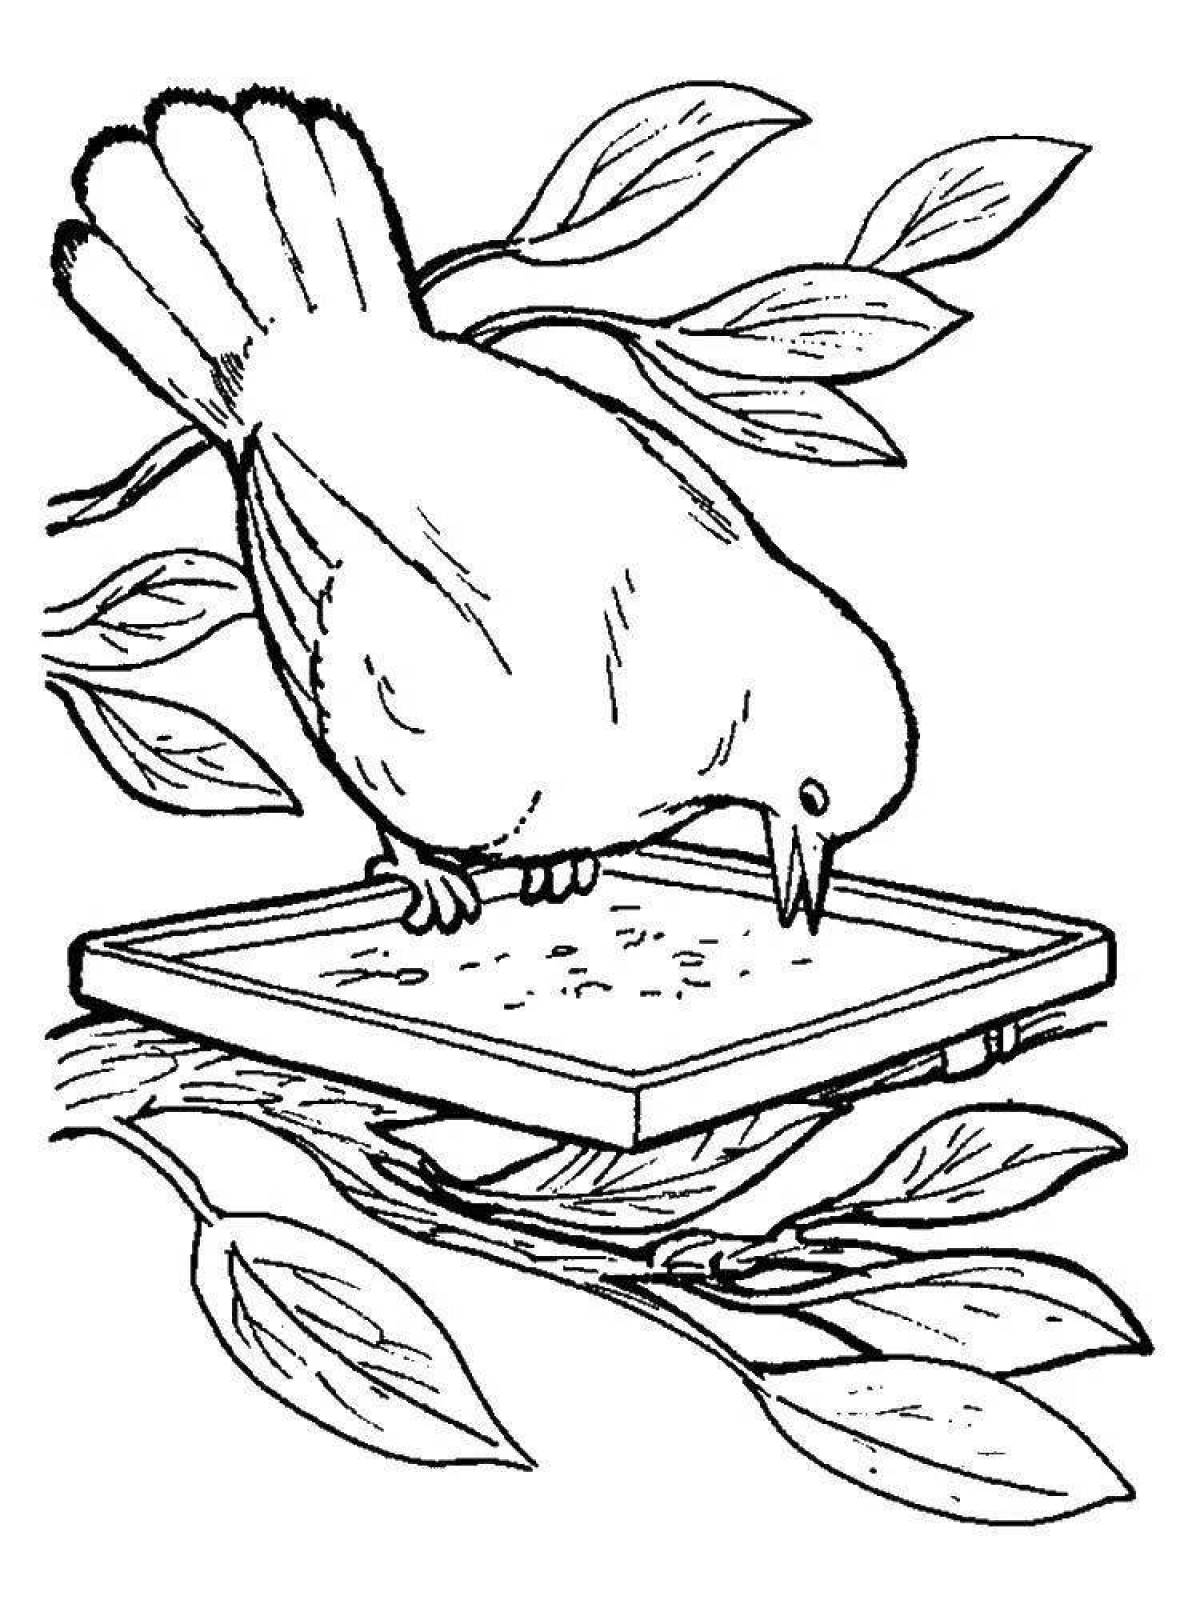 Our bird friends animated coloring page